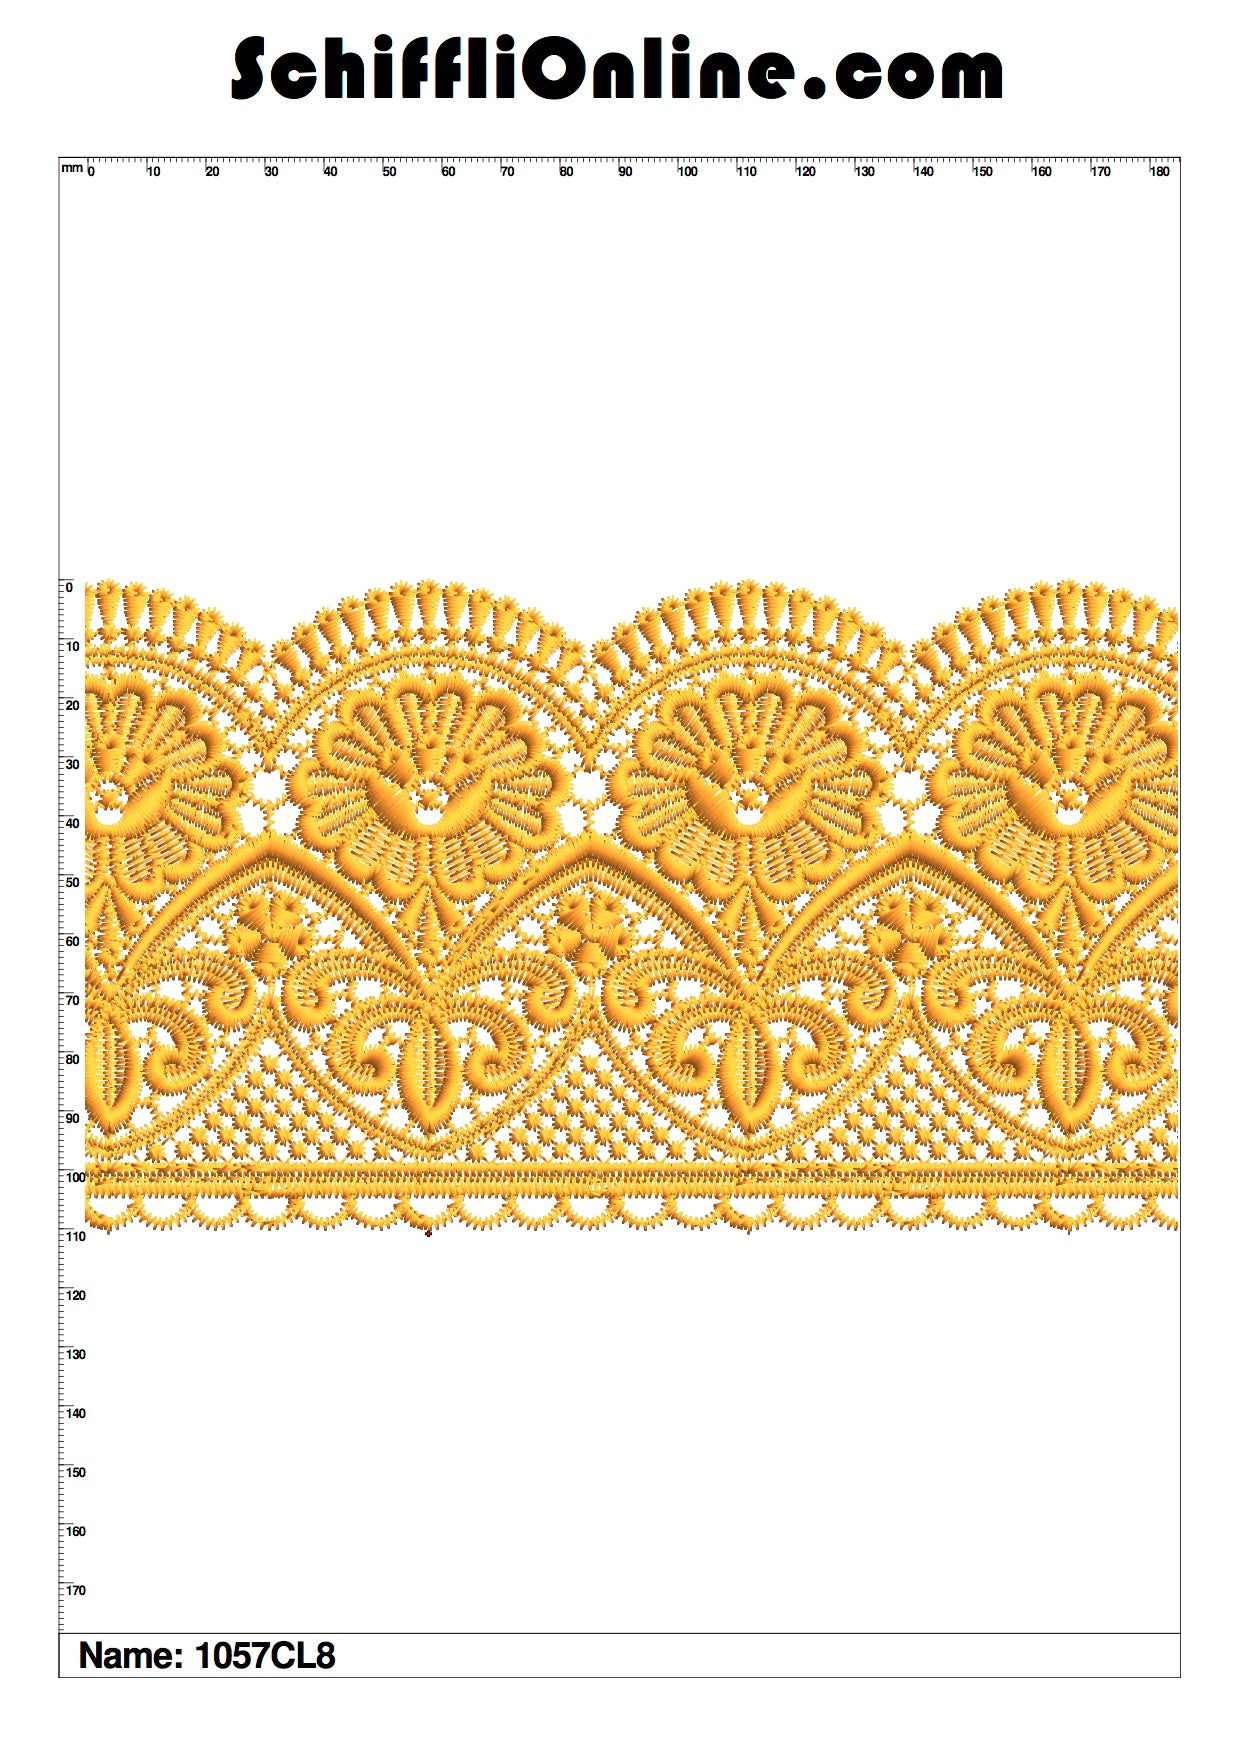 Book 133 CHEMICAL LACE 8X4 50 DESIGNS